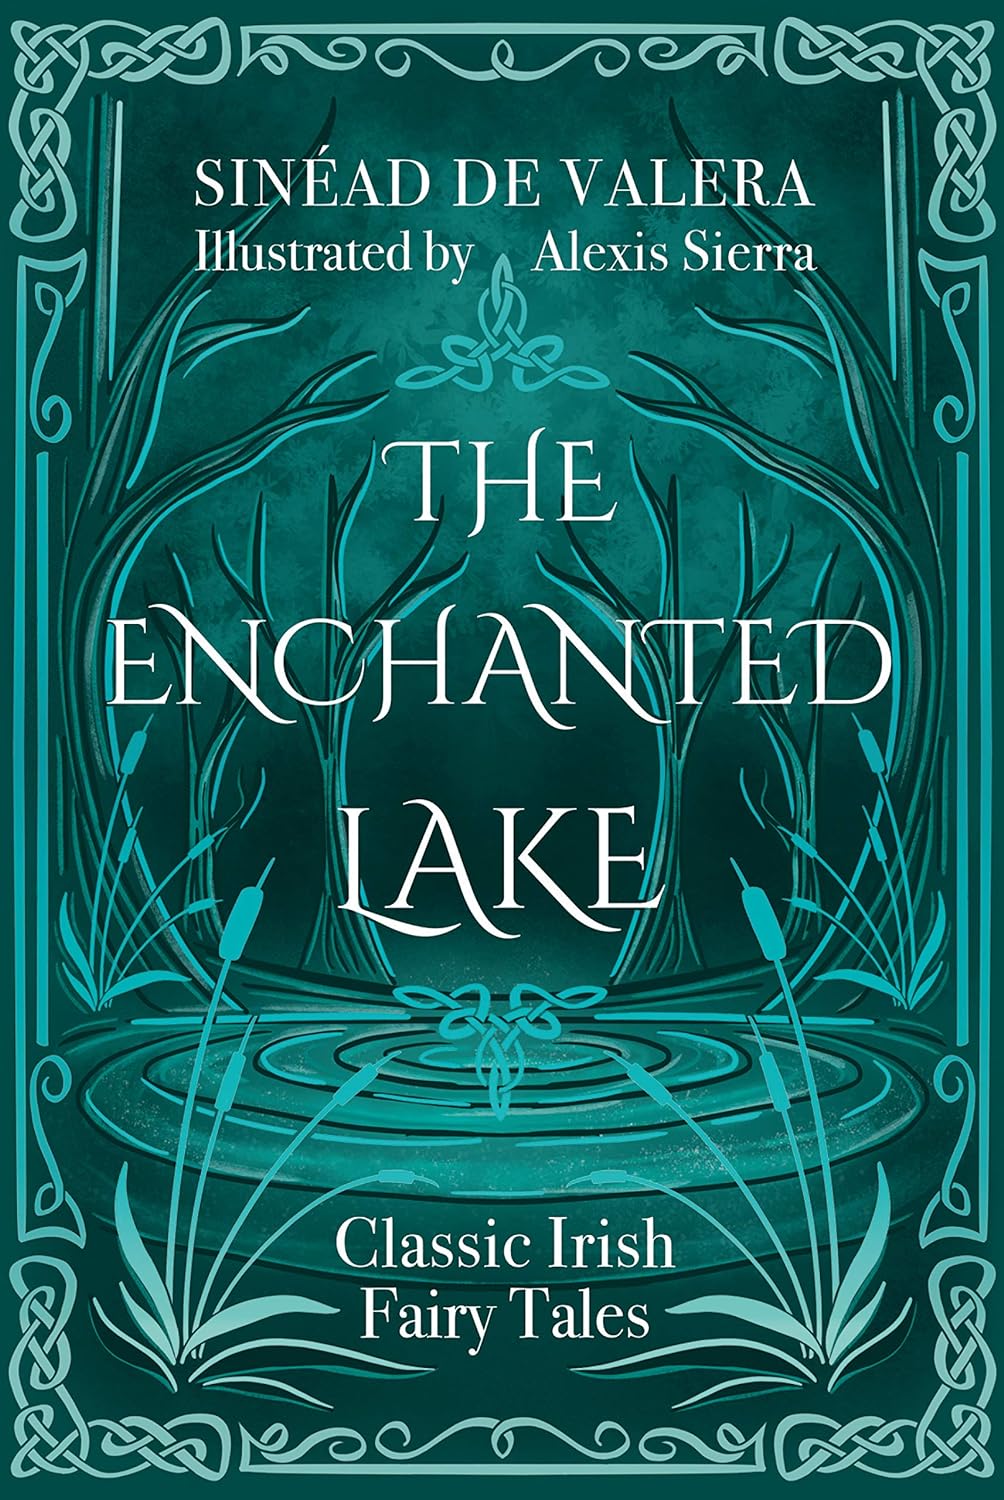 Sinéad de Valera: The Enchanted Lake, illustrated by Alexis Sierra